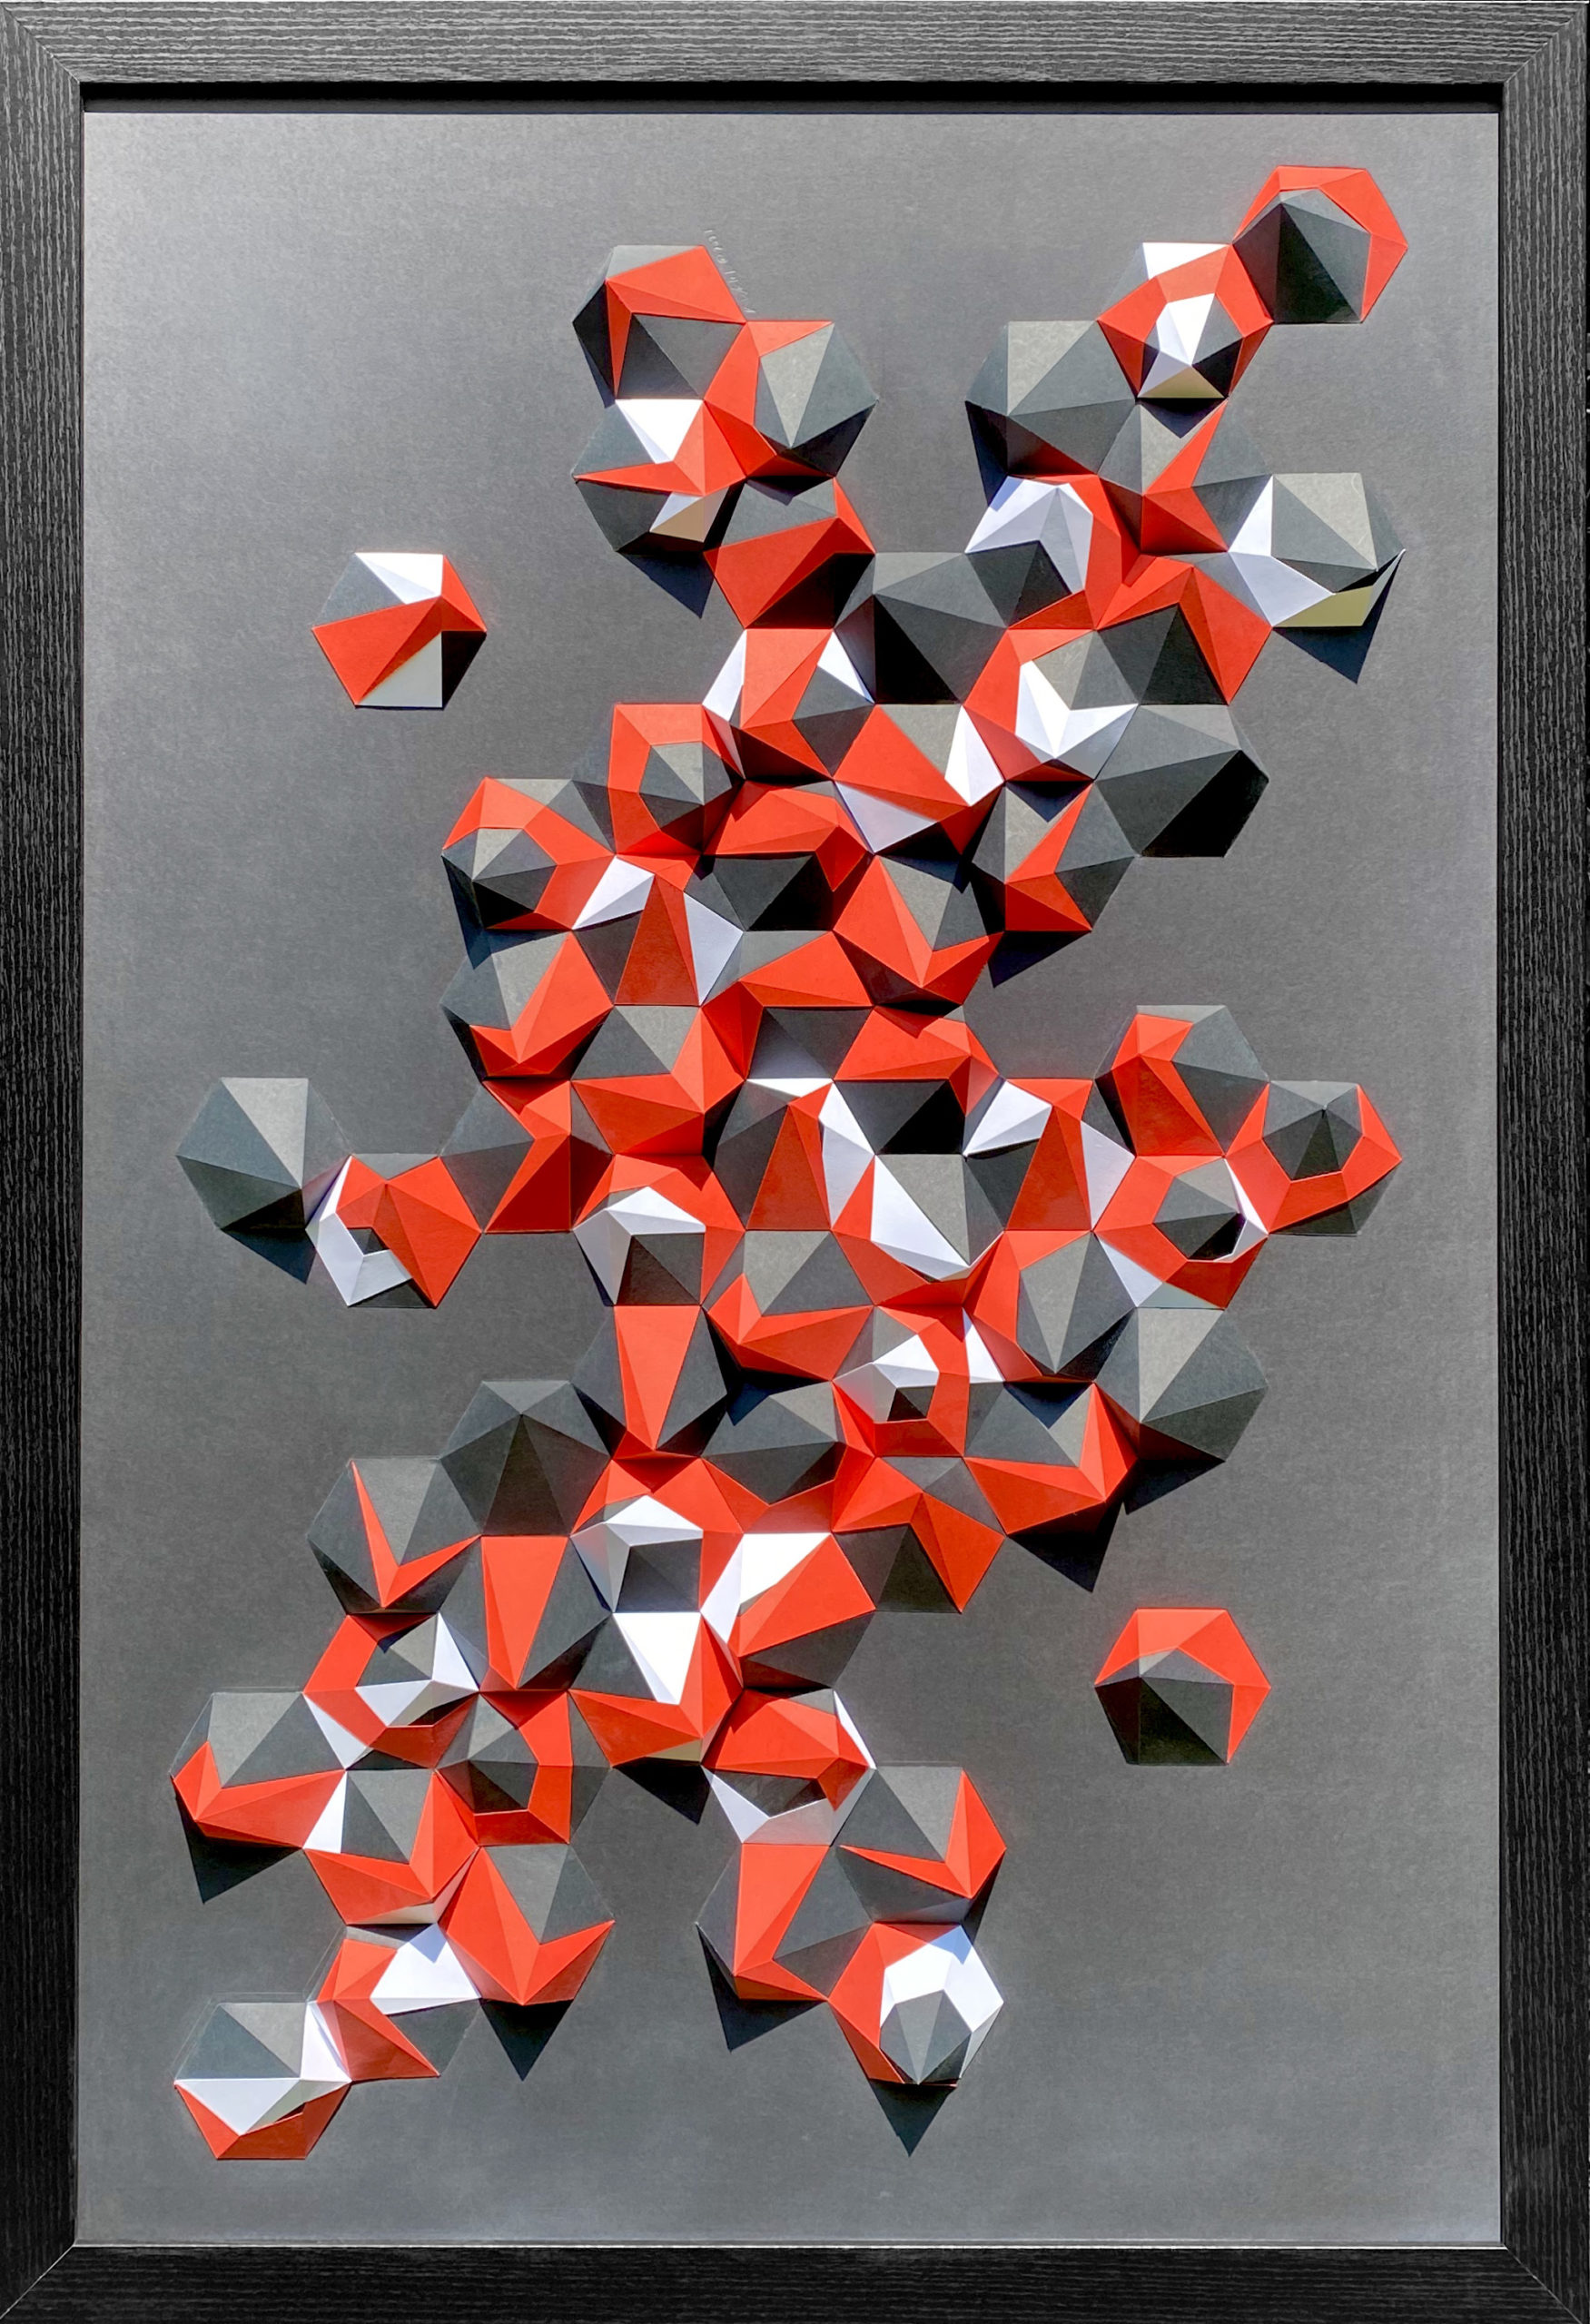 A cluster of geometric shapes that have the appearance of a crystal formation in a digital form. The colors on the page are orange, silver and black